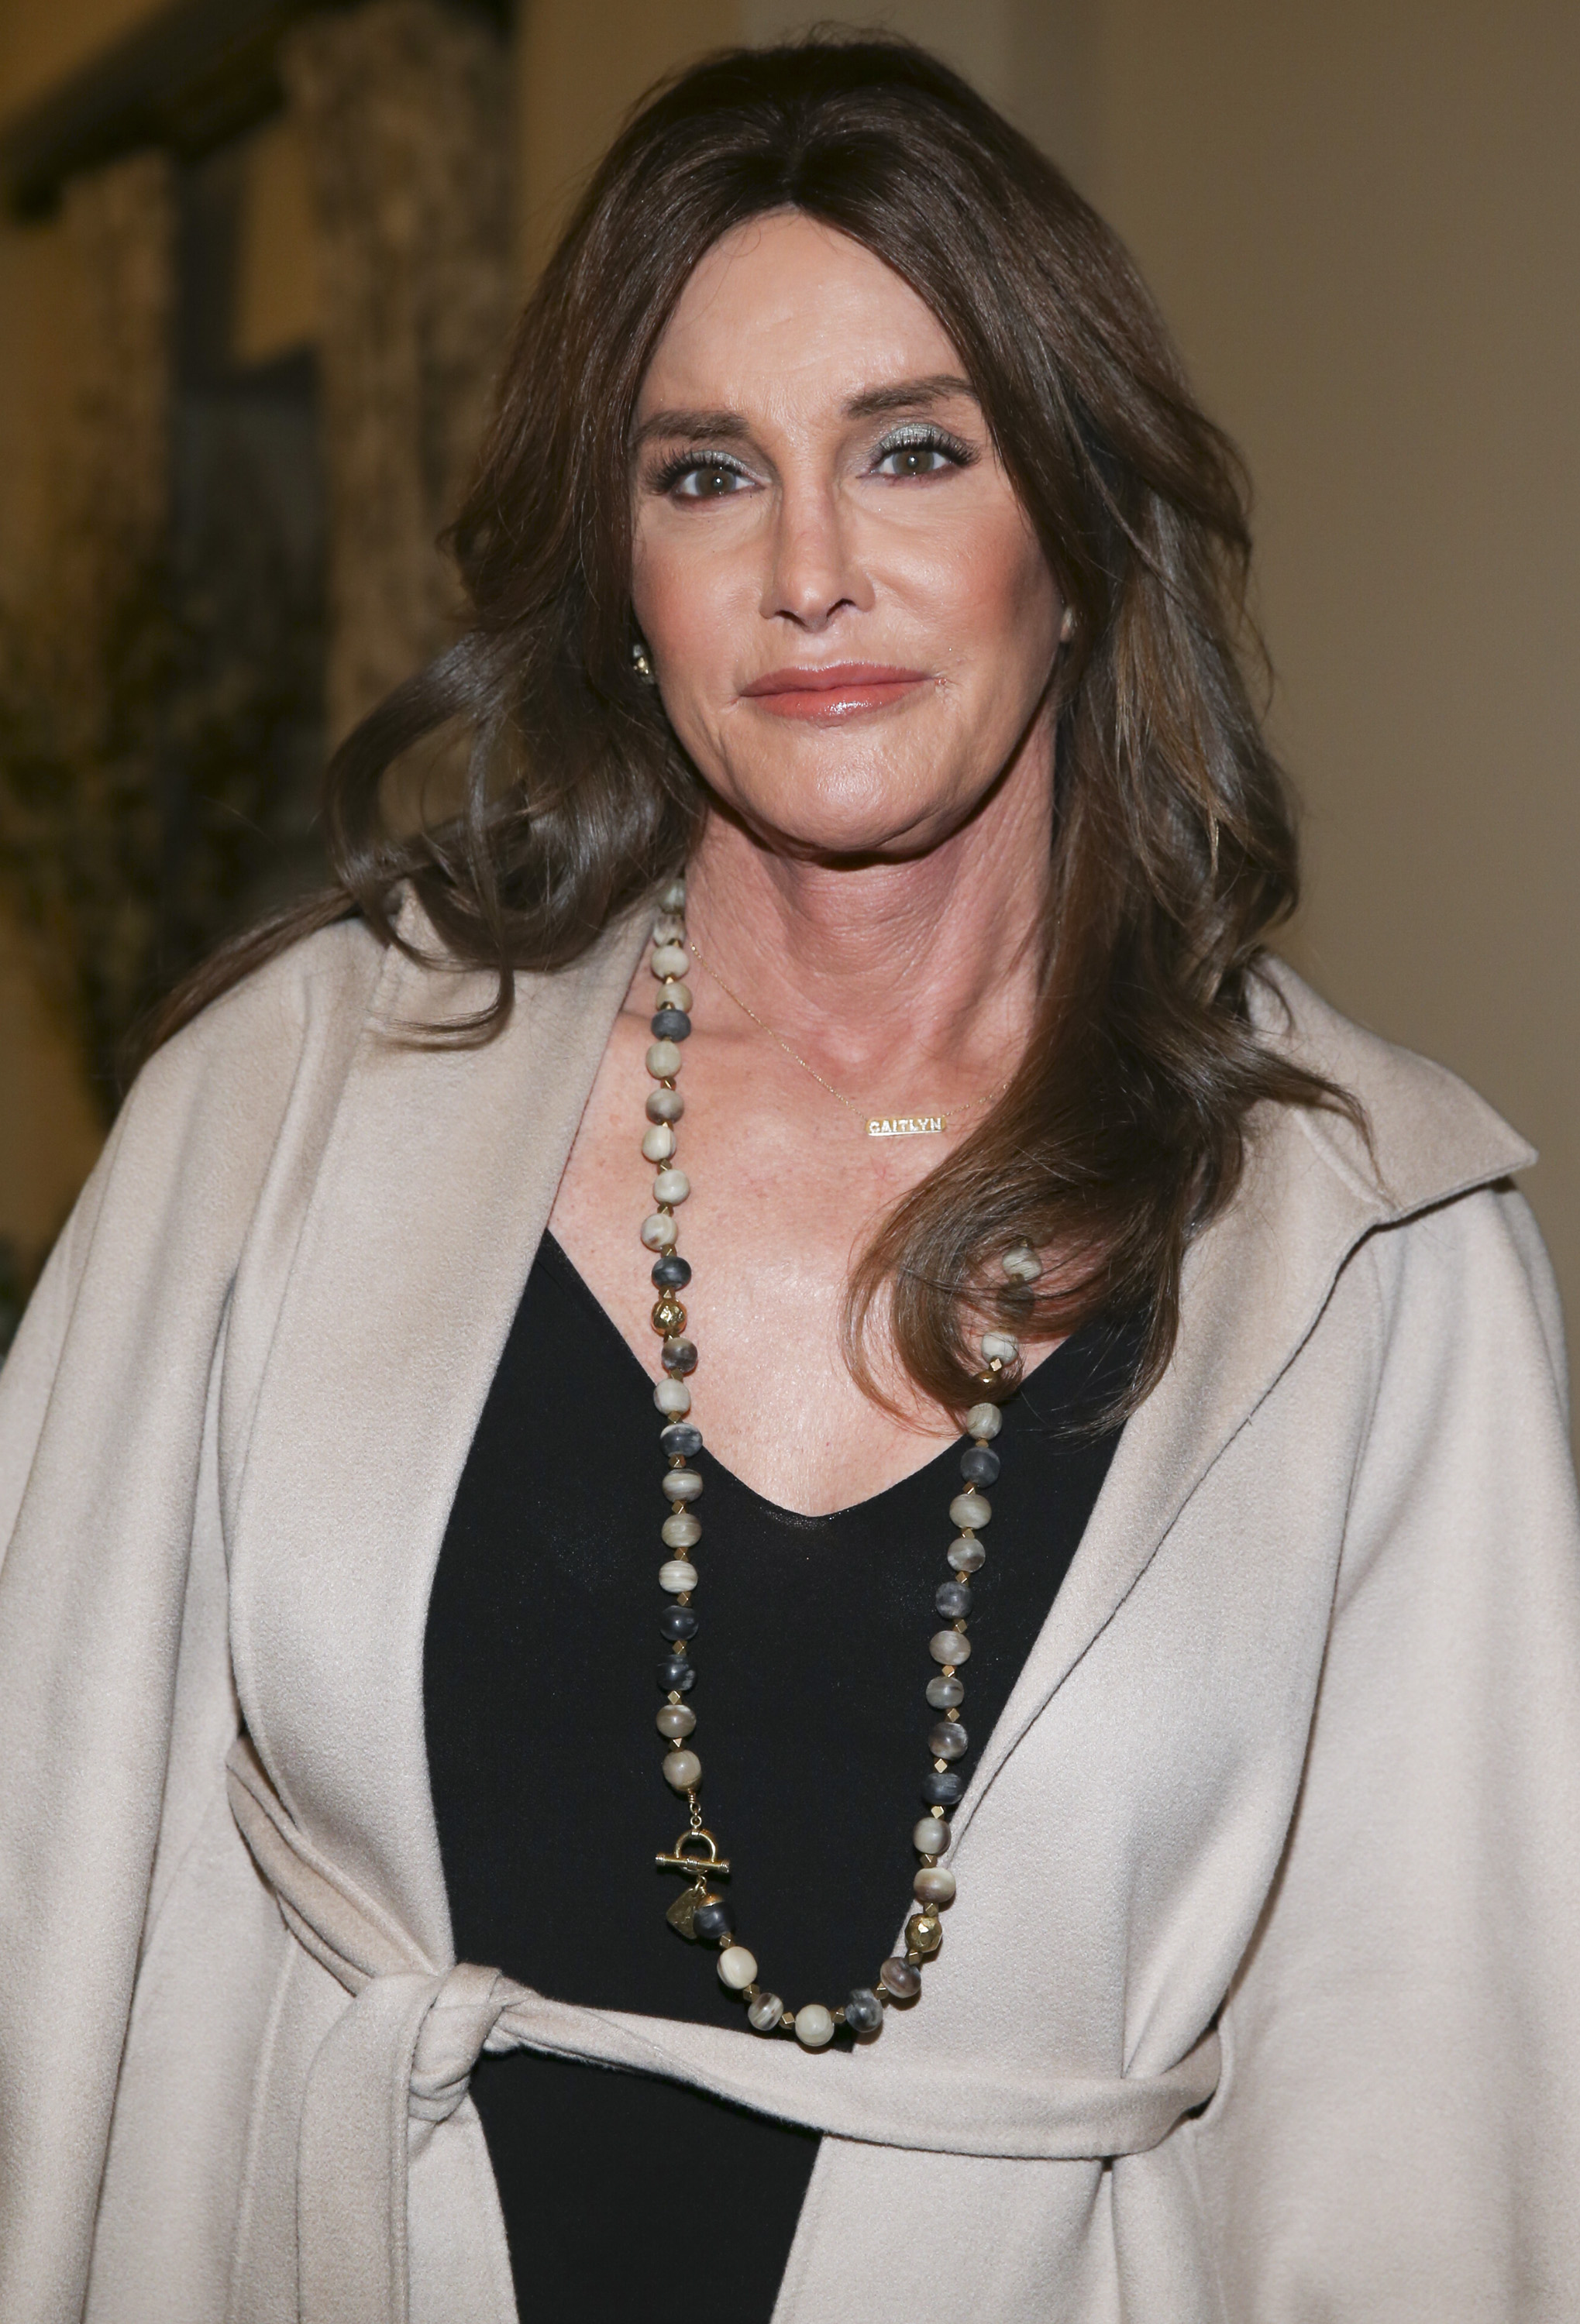 Caitlyn Jenner at the 2016 MAKERS Conference in Rancho Palos Verdes, Calif. on Feb. 1, 2016. (Jonathan Leibson—Getty Images for AOL)